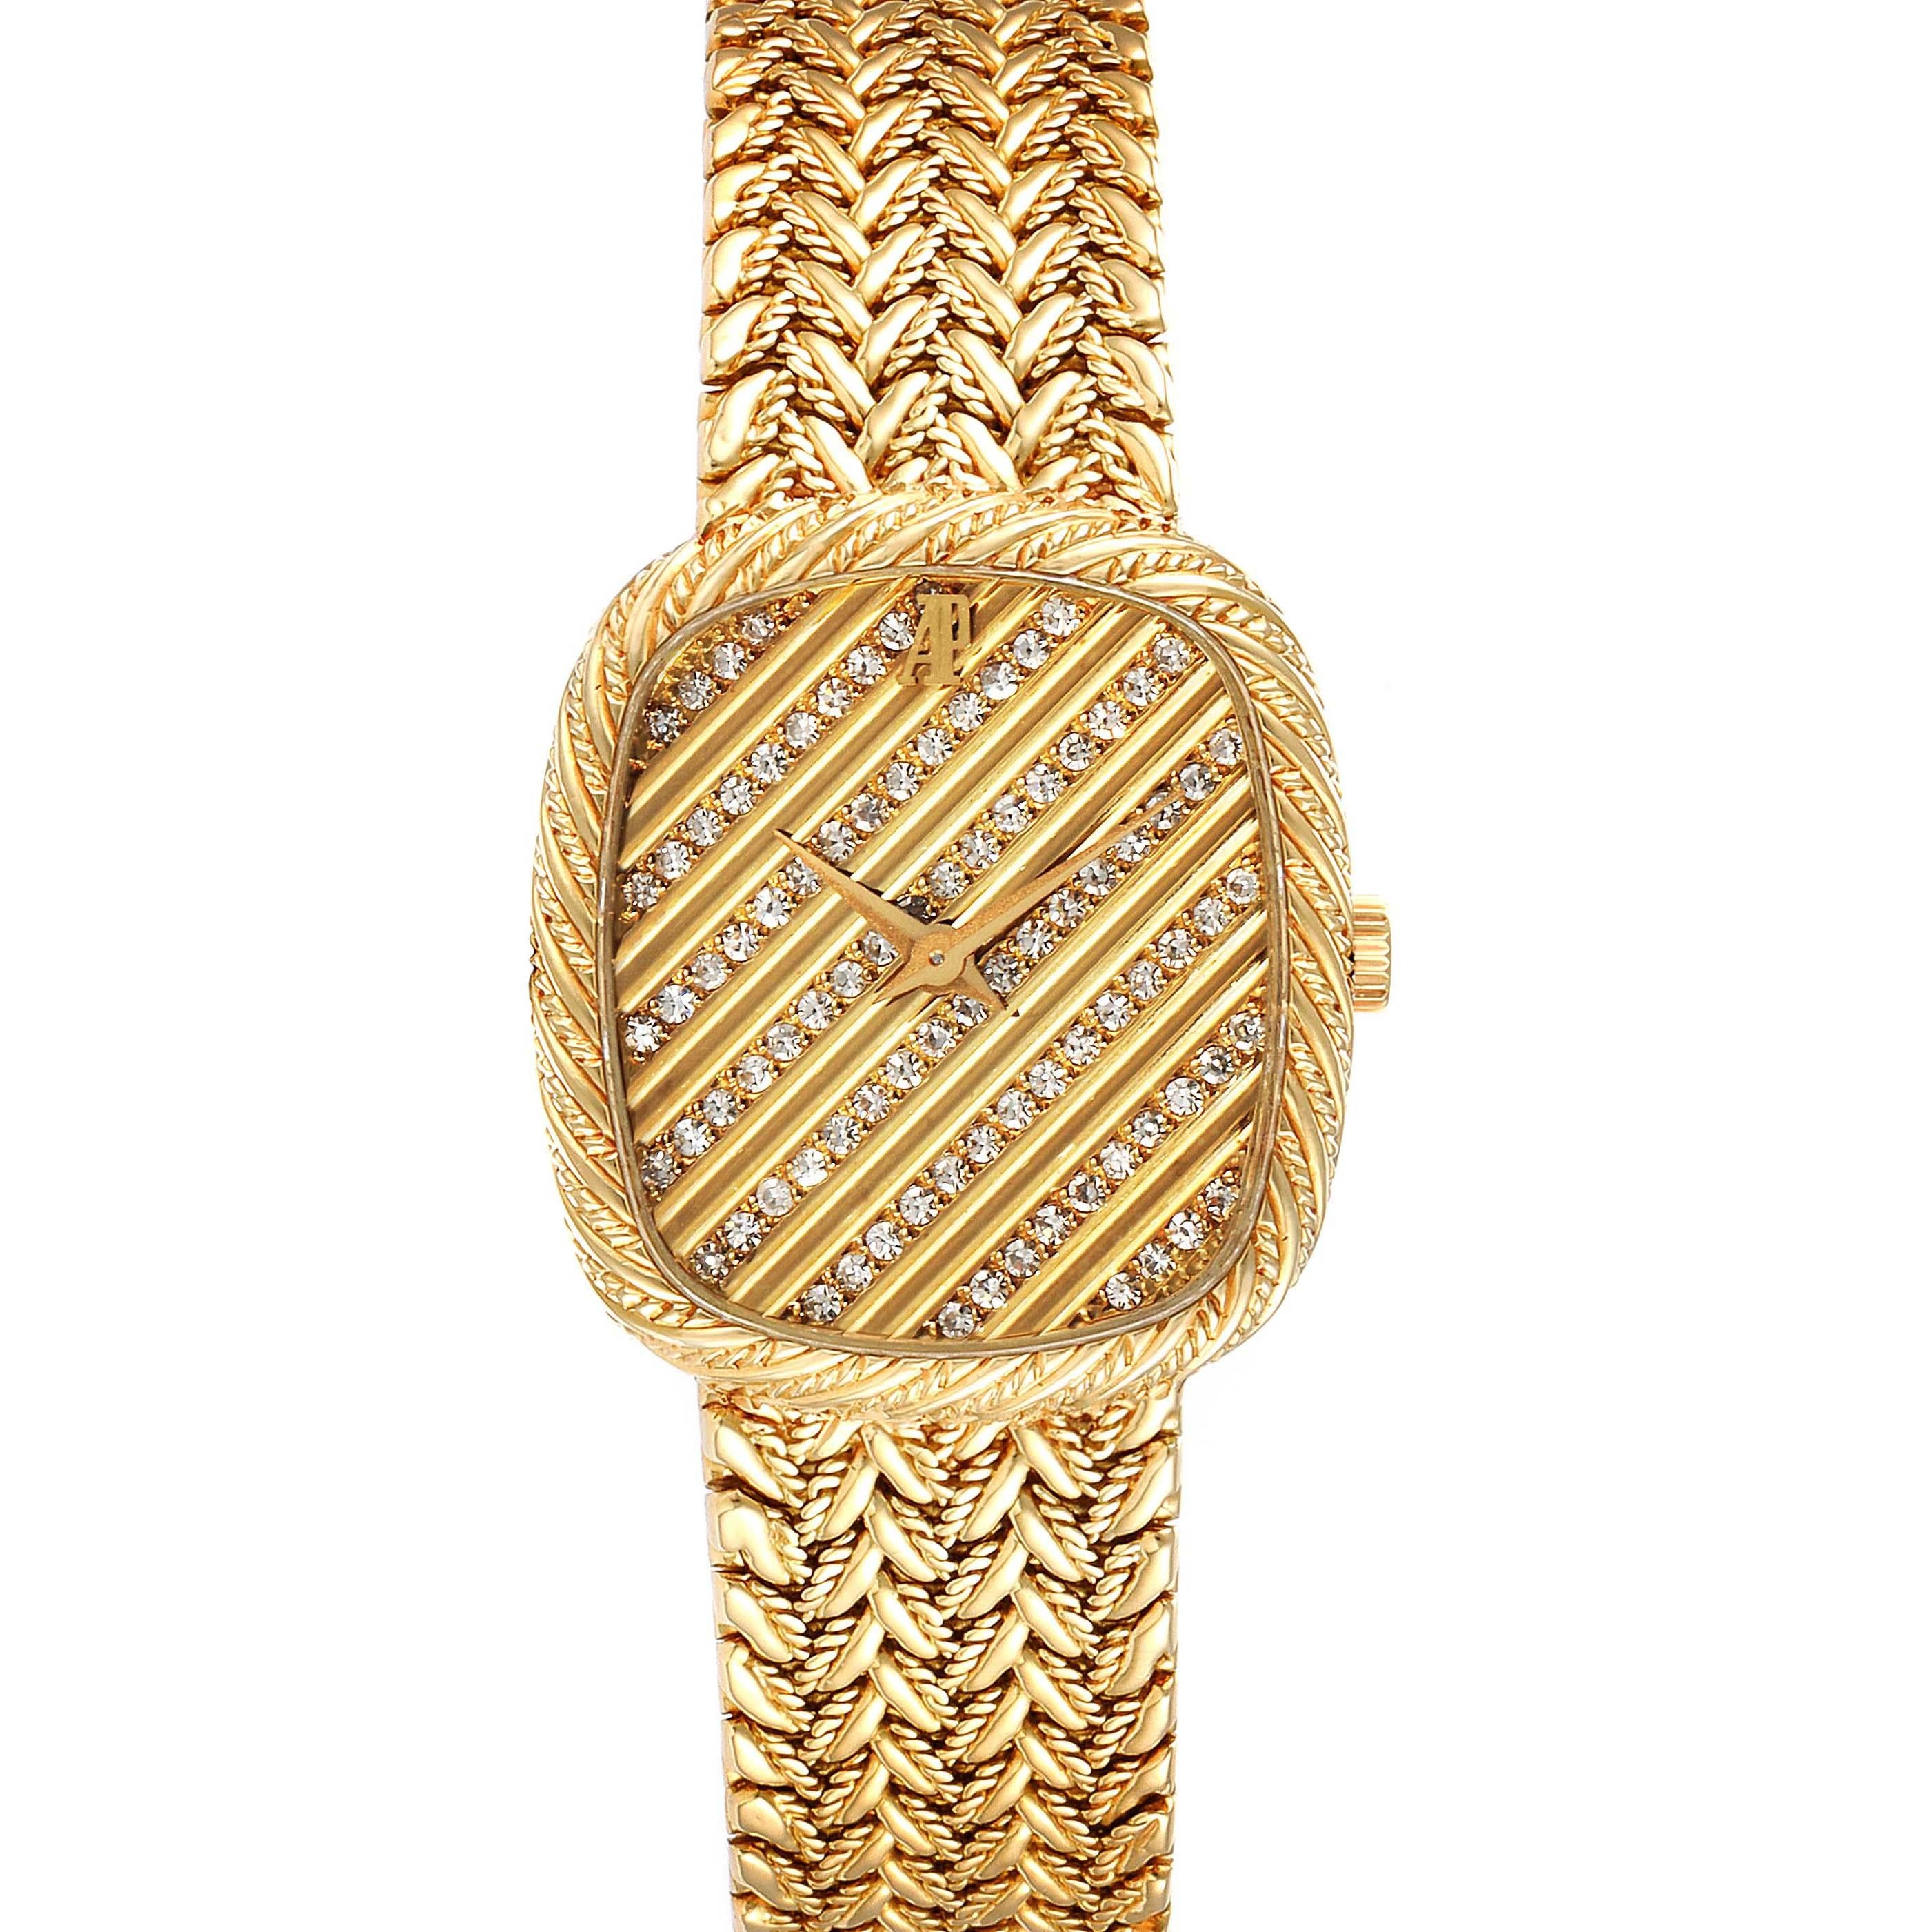 Audemars Piguet 18k Yellow Gold Diamond Dial Cocktail Ladies Watch. Manual winding movement. 18k yellow gold case 27.0 x 24.0 mm in diameter. 18K yellow gold bezel engraved to repeat the bracelet pattern. Scratch resistant sapphire crystal. Gold